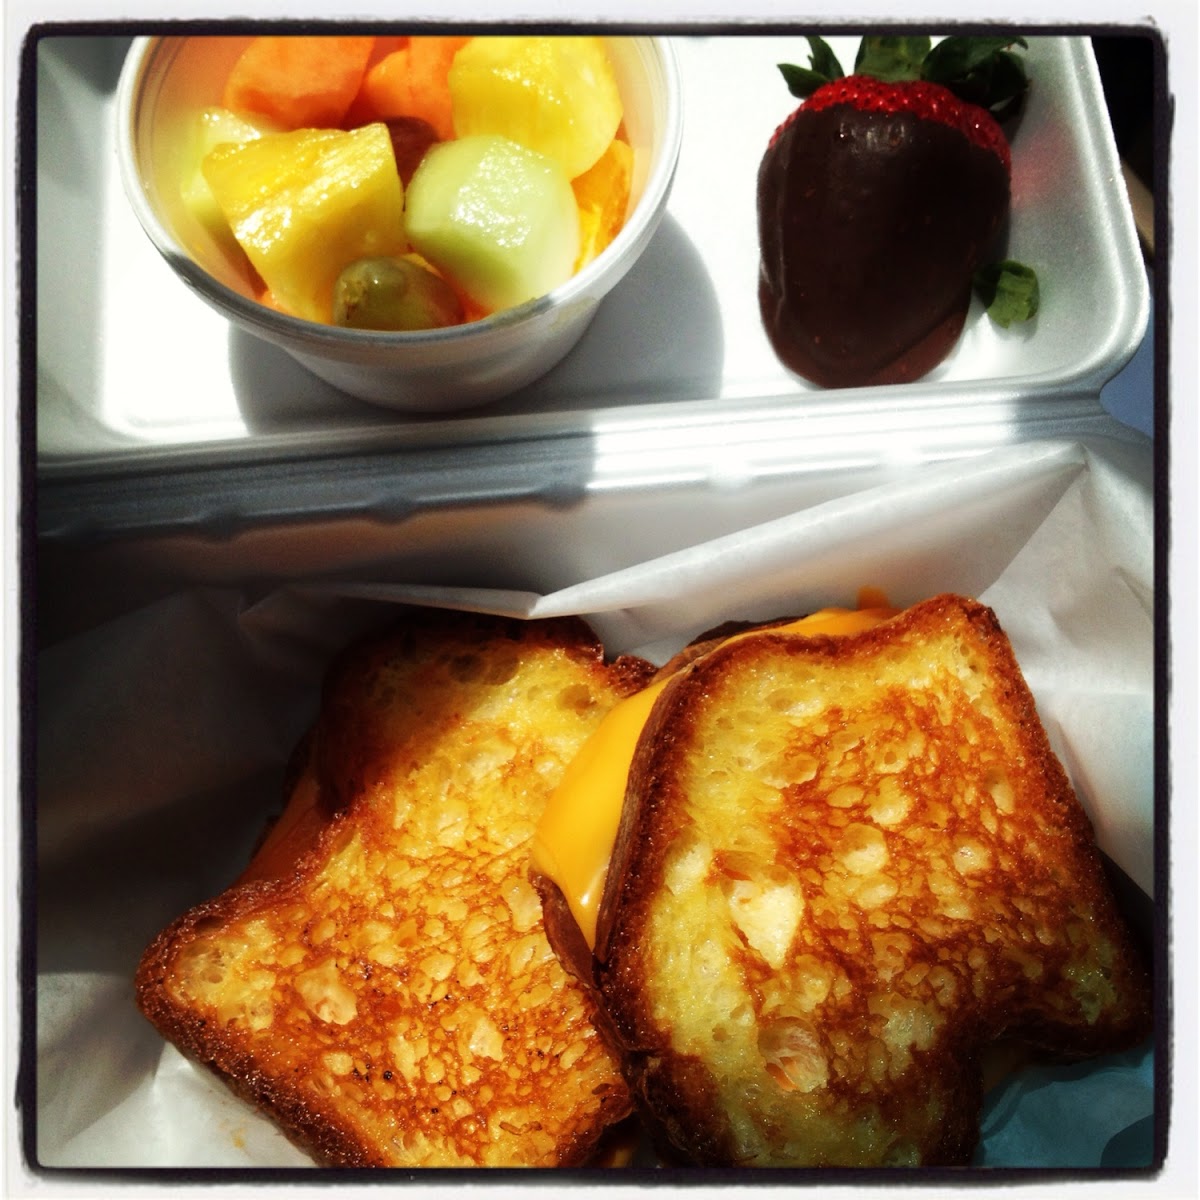 GF grilled cheese with a side of fruit